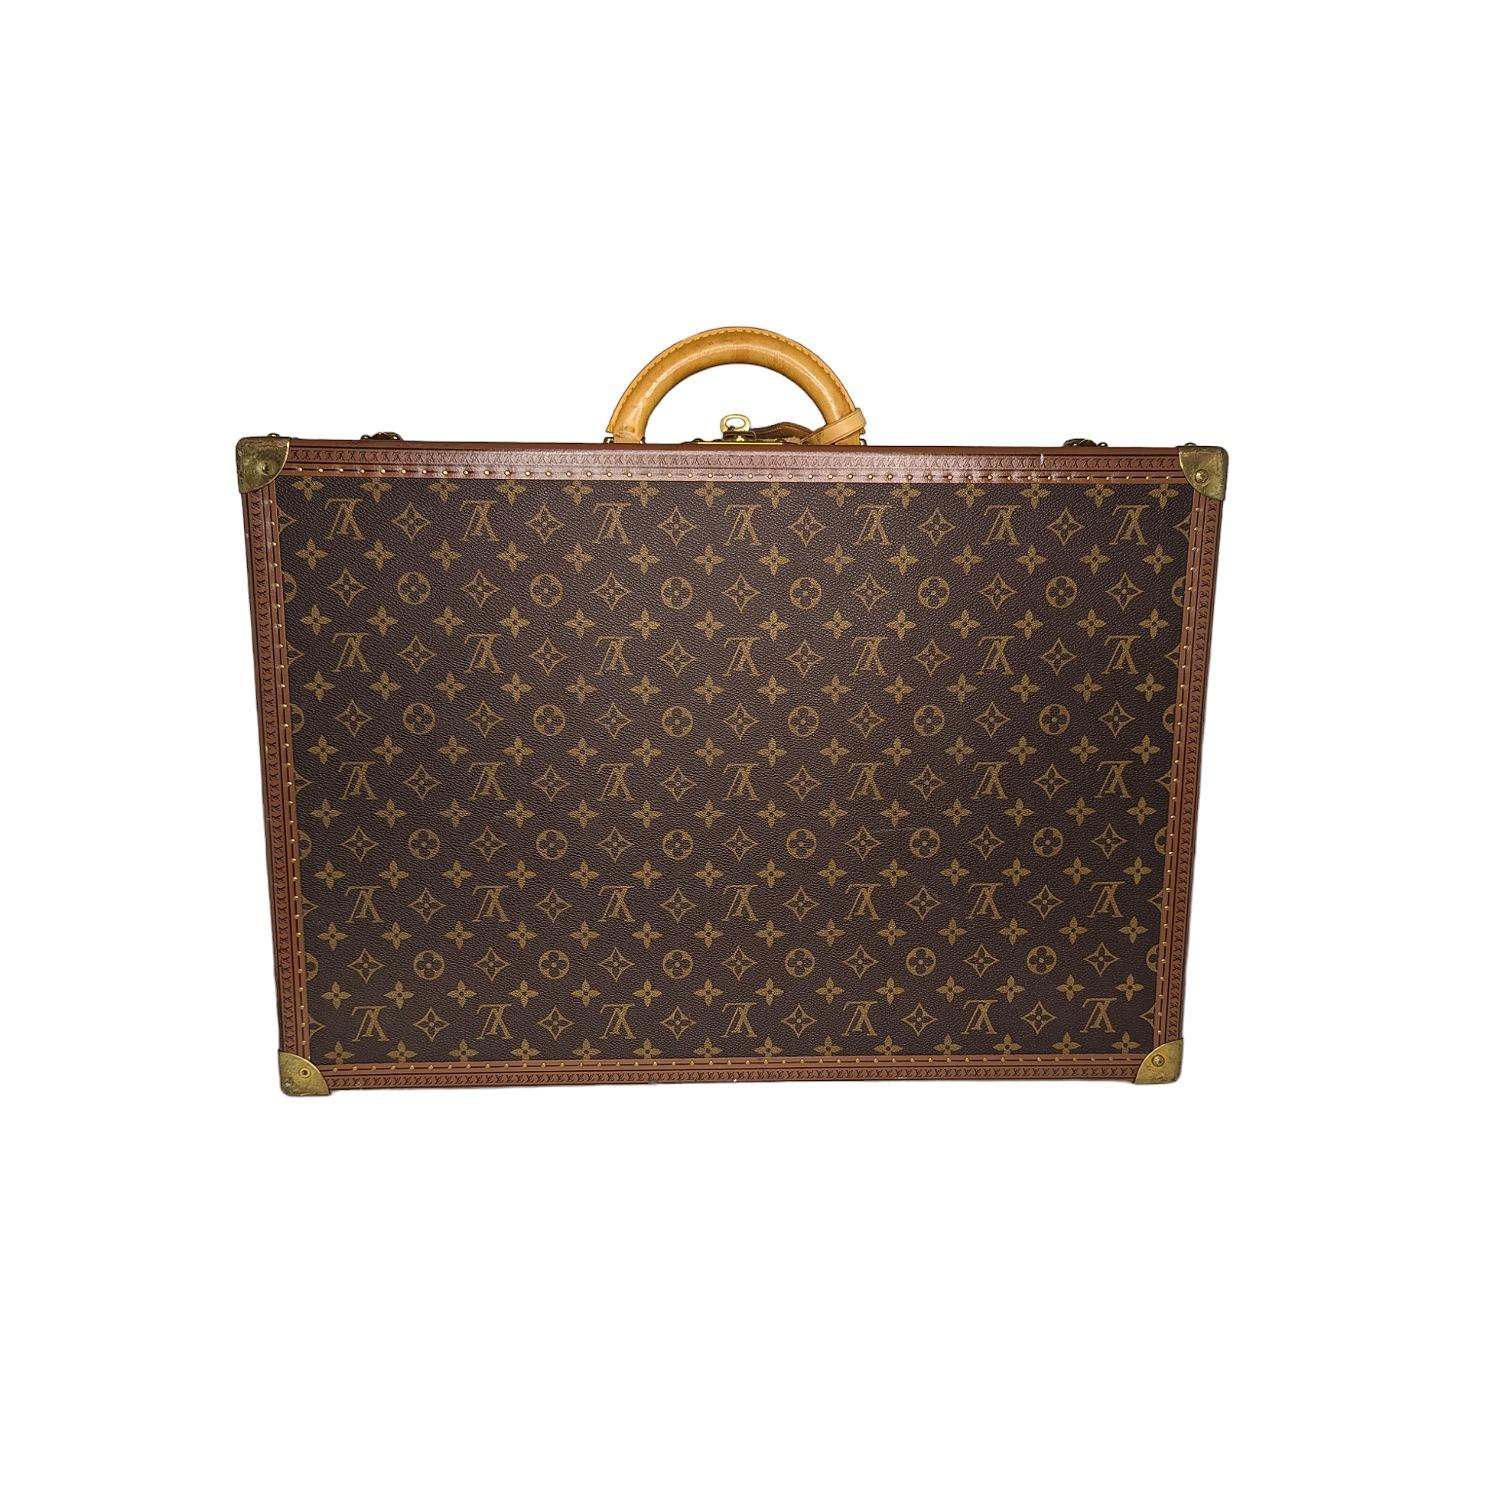 Louis Vuitton Monogram Alzer 60 Trunk Luggage In Good Condition For Sale In Scottsdale, AZ